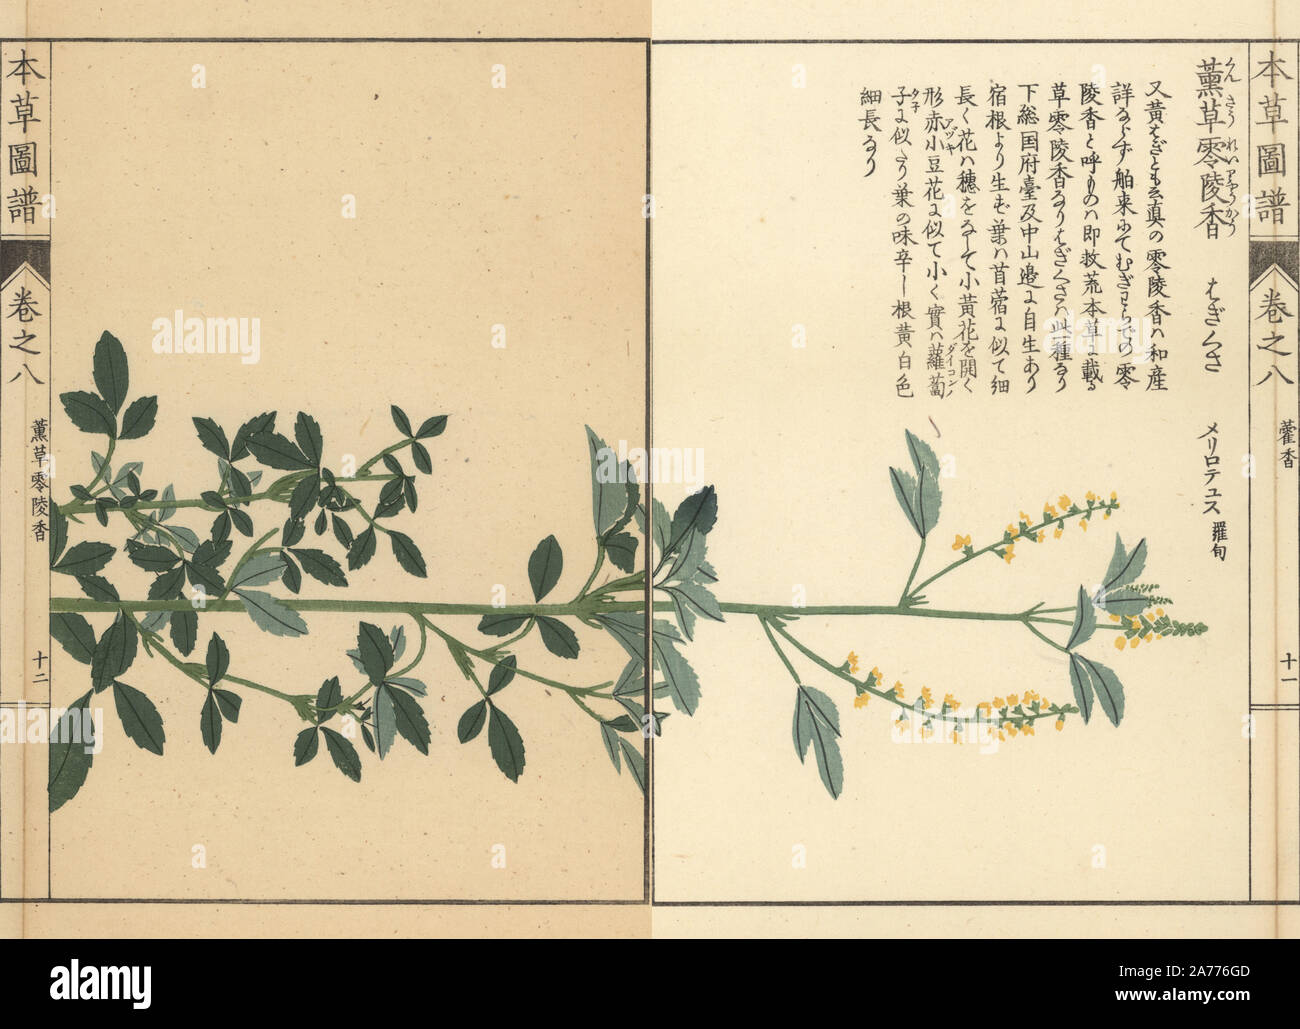 Sweet clover, Melilotus indicus. Colour-printed woodblock engraving by Kan'en Iwasaki from 'Honzo Zufu,' an Illustrated Guide to Medicinal Plants, Japan, 1884. Iwasaki (1786-1842) was a Japanese botanist, entomologist and zoologist. He was one of the first Japanese botanists to incorporate western knowledge into his studies. Stock Photo